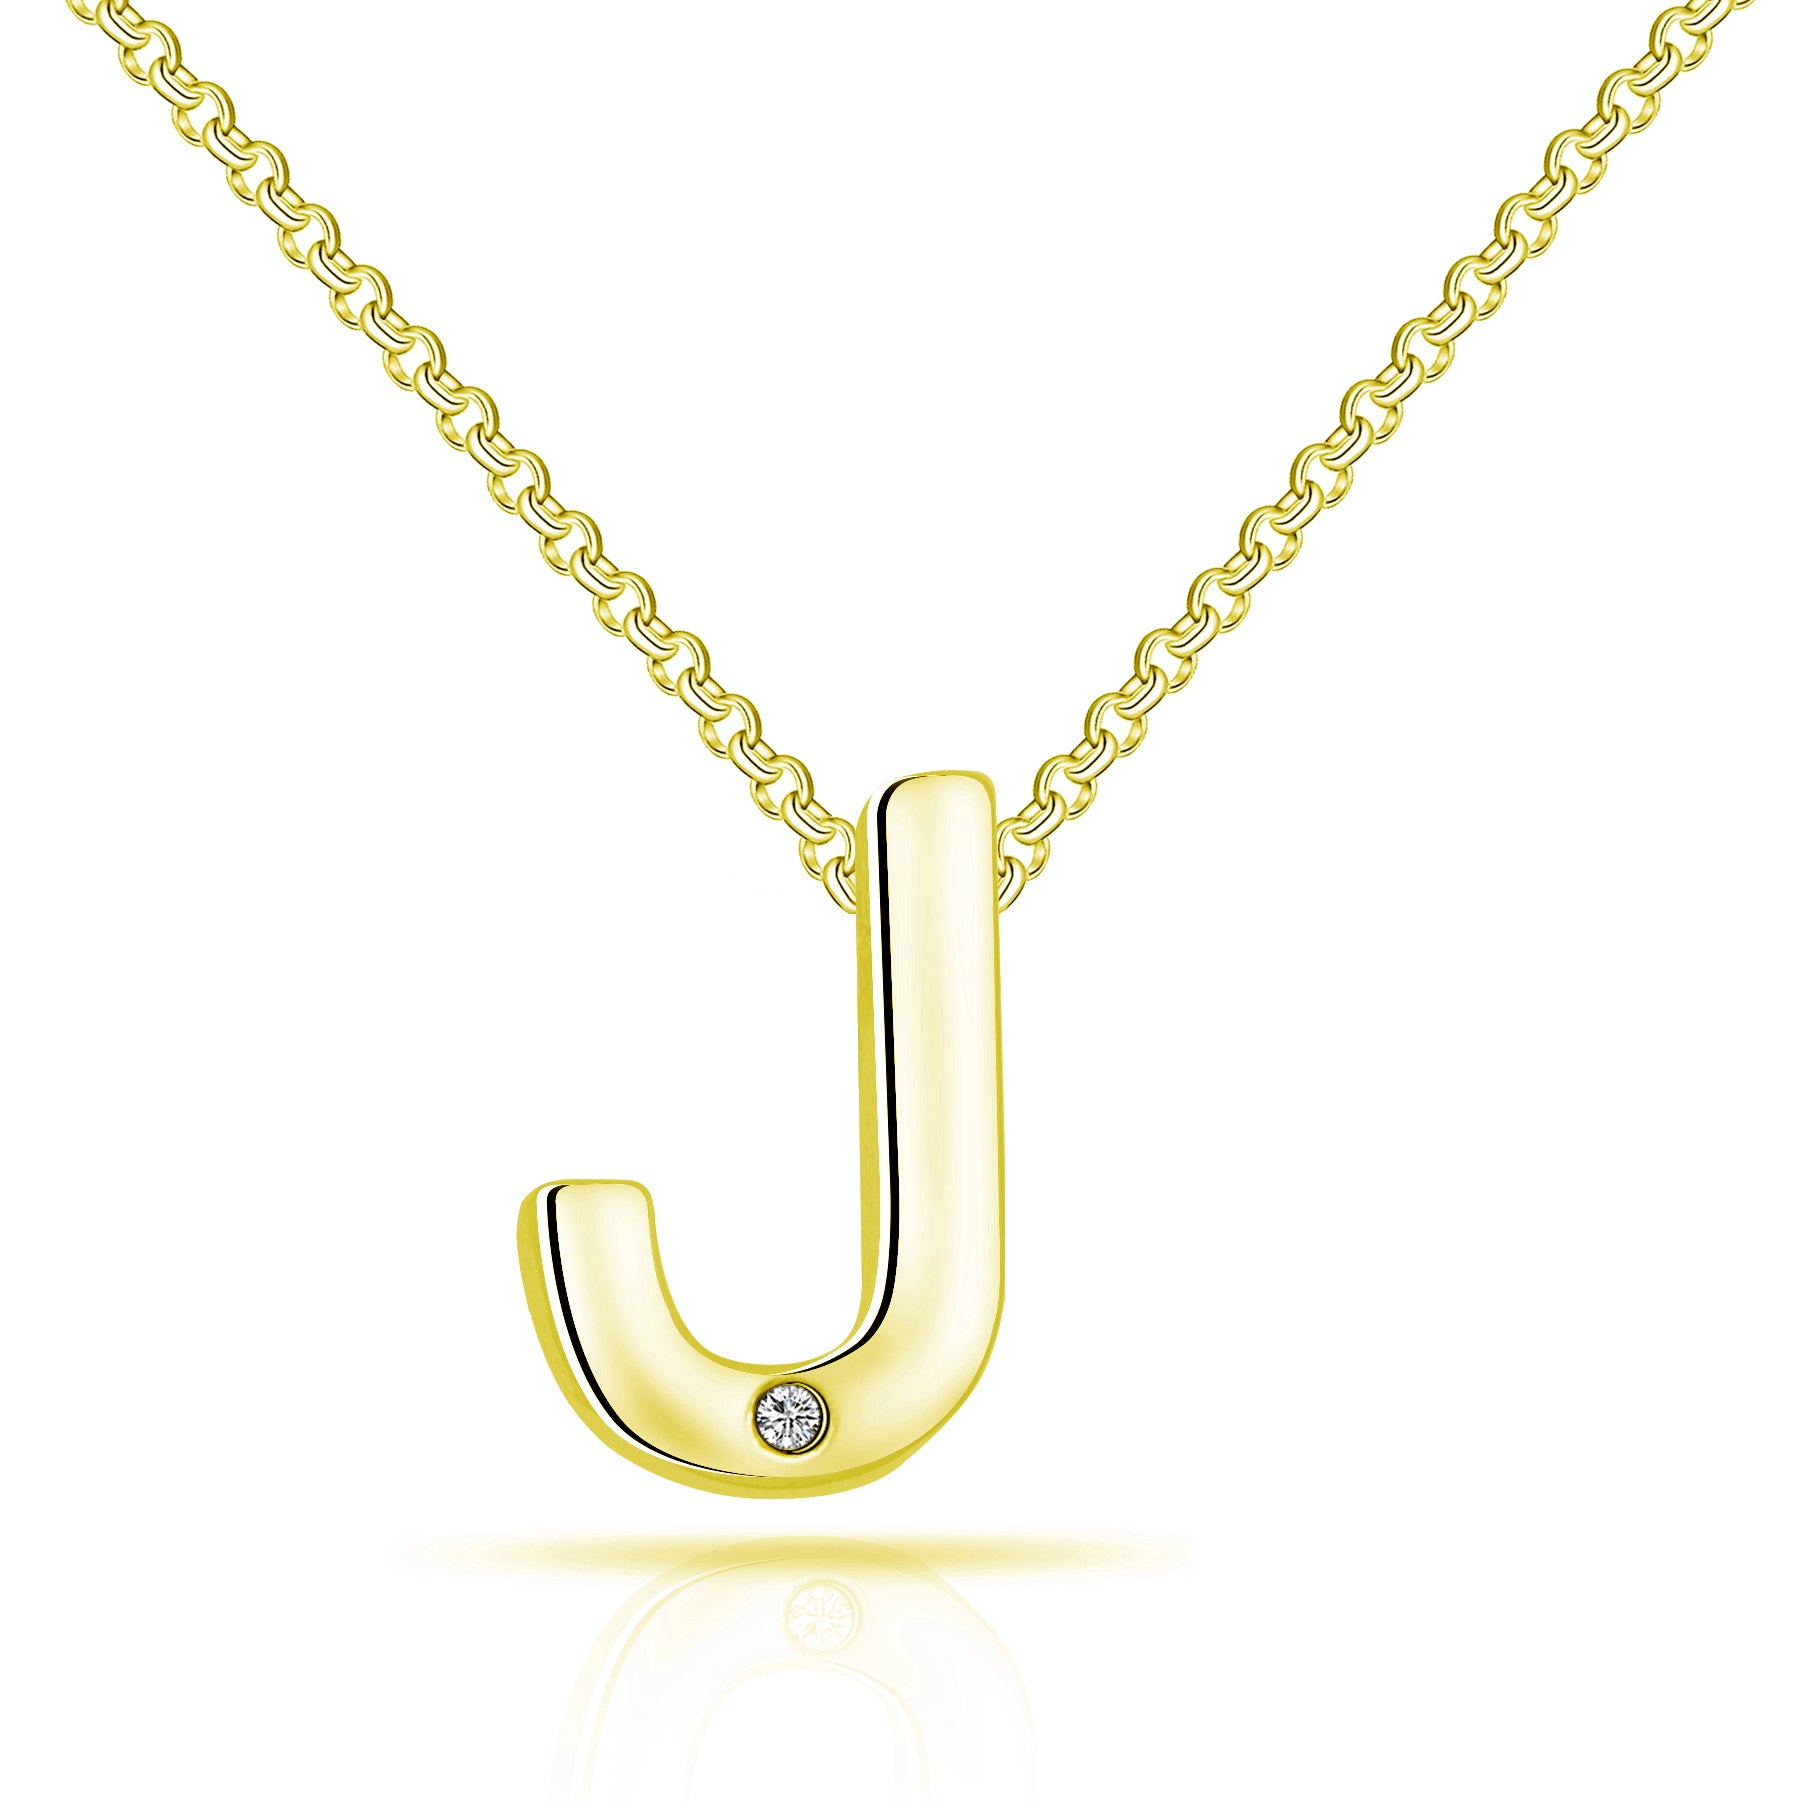 Gold Plated Initial Necklace Letter J Created with Zircondia® Crystals by Philip Jones Jewellery